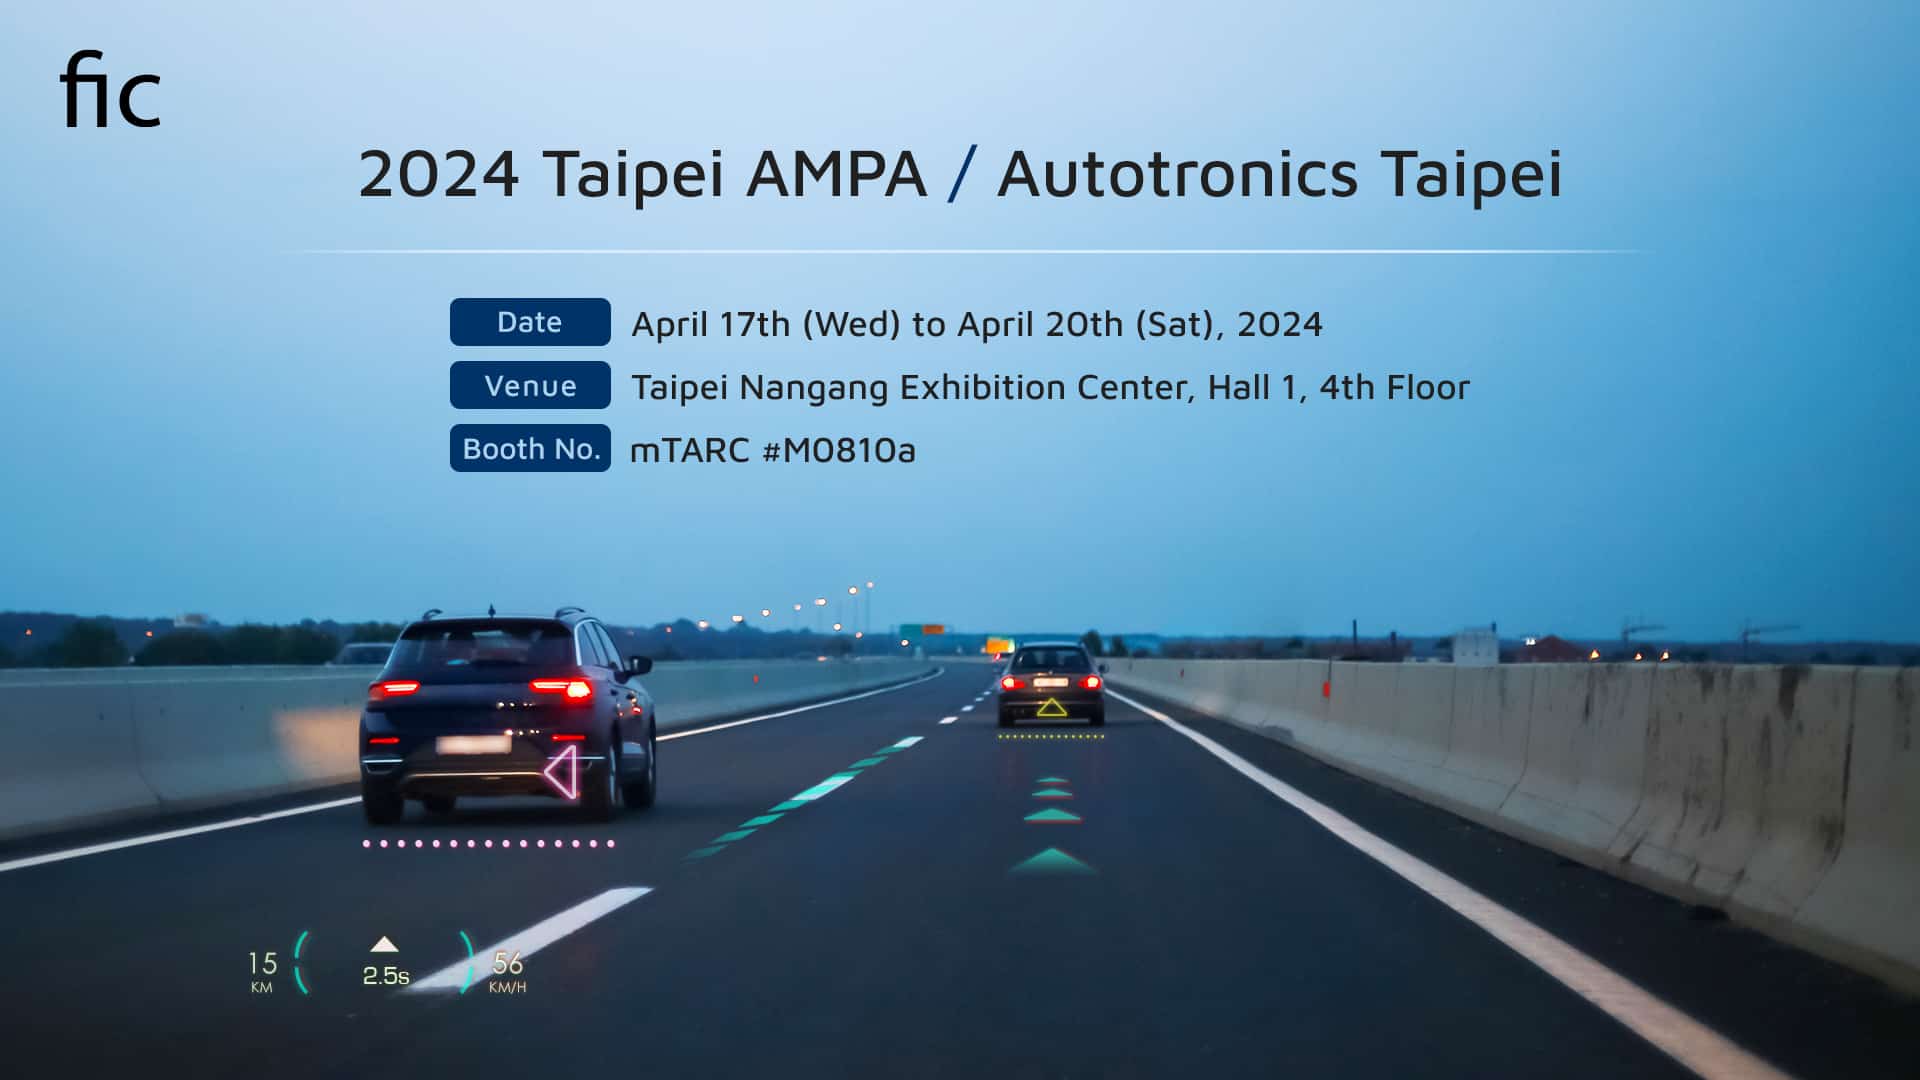 2024 Taipei AMPA Experience FIC's Augmented Reality Head-Up Display Solution